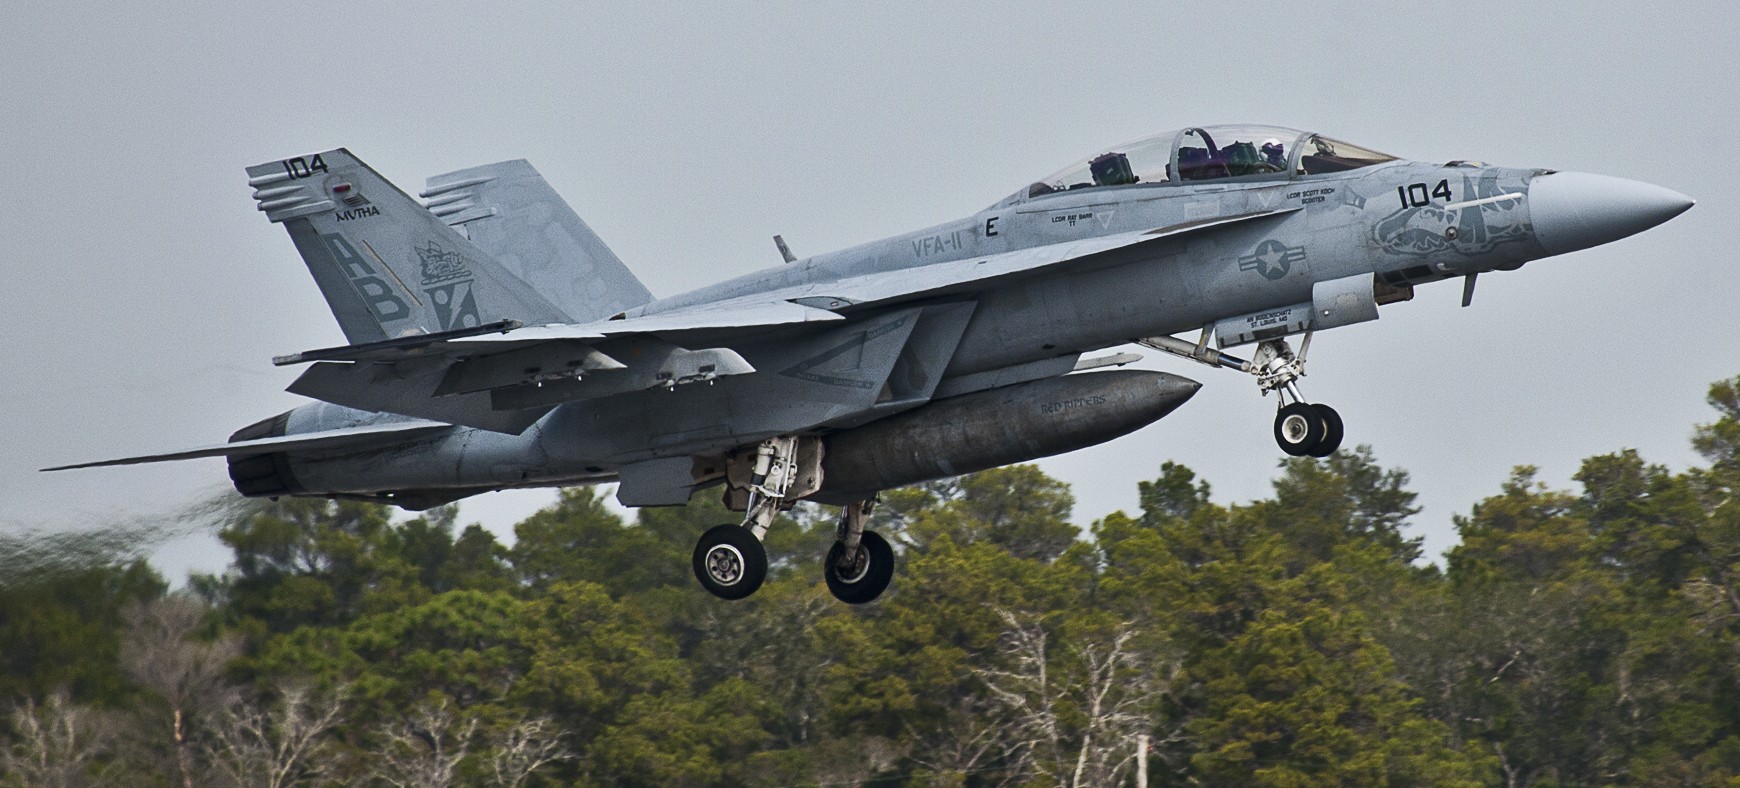 vfa-11 red rippers strike fighter squadron us navy f/a-18f super hornet carrier air wing cvw-1 06 eglin afb florida